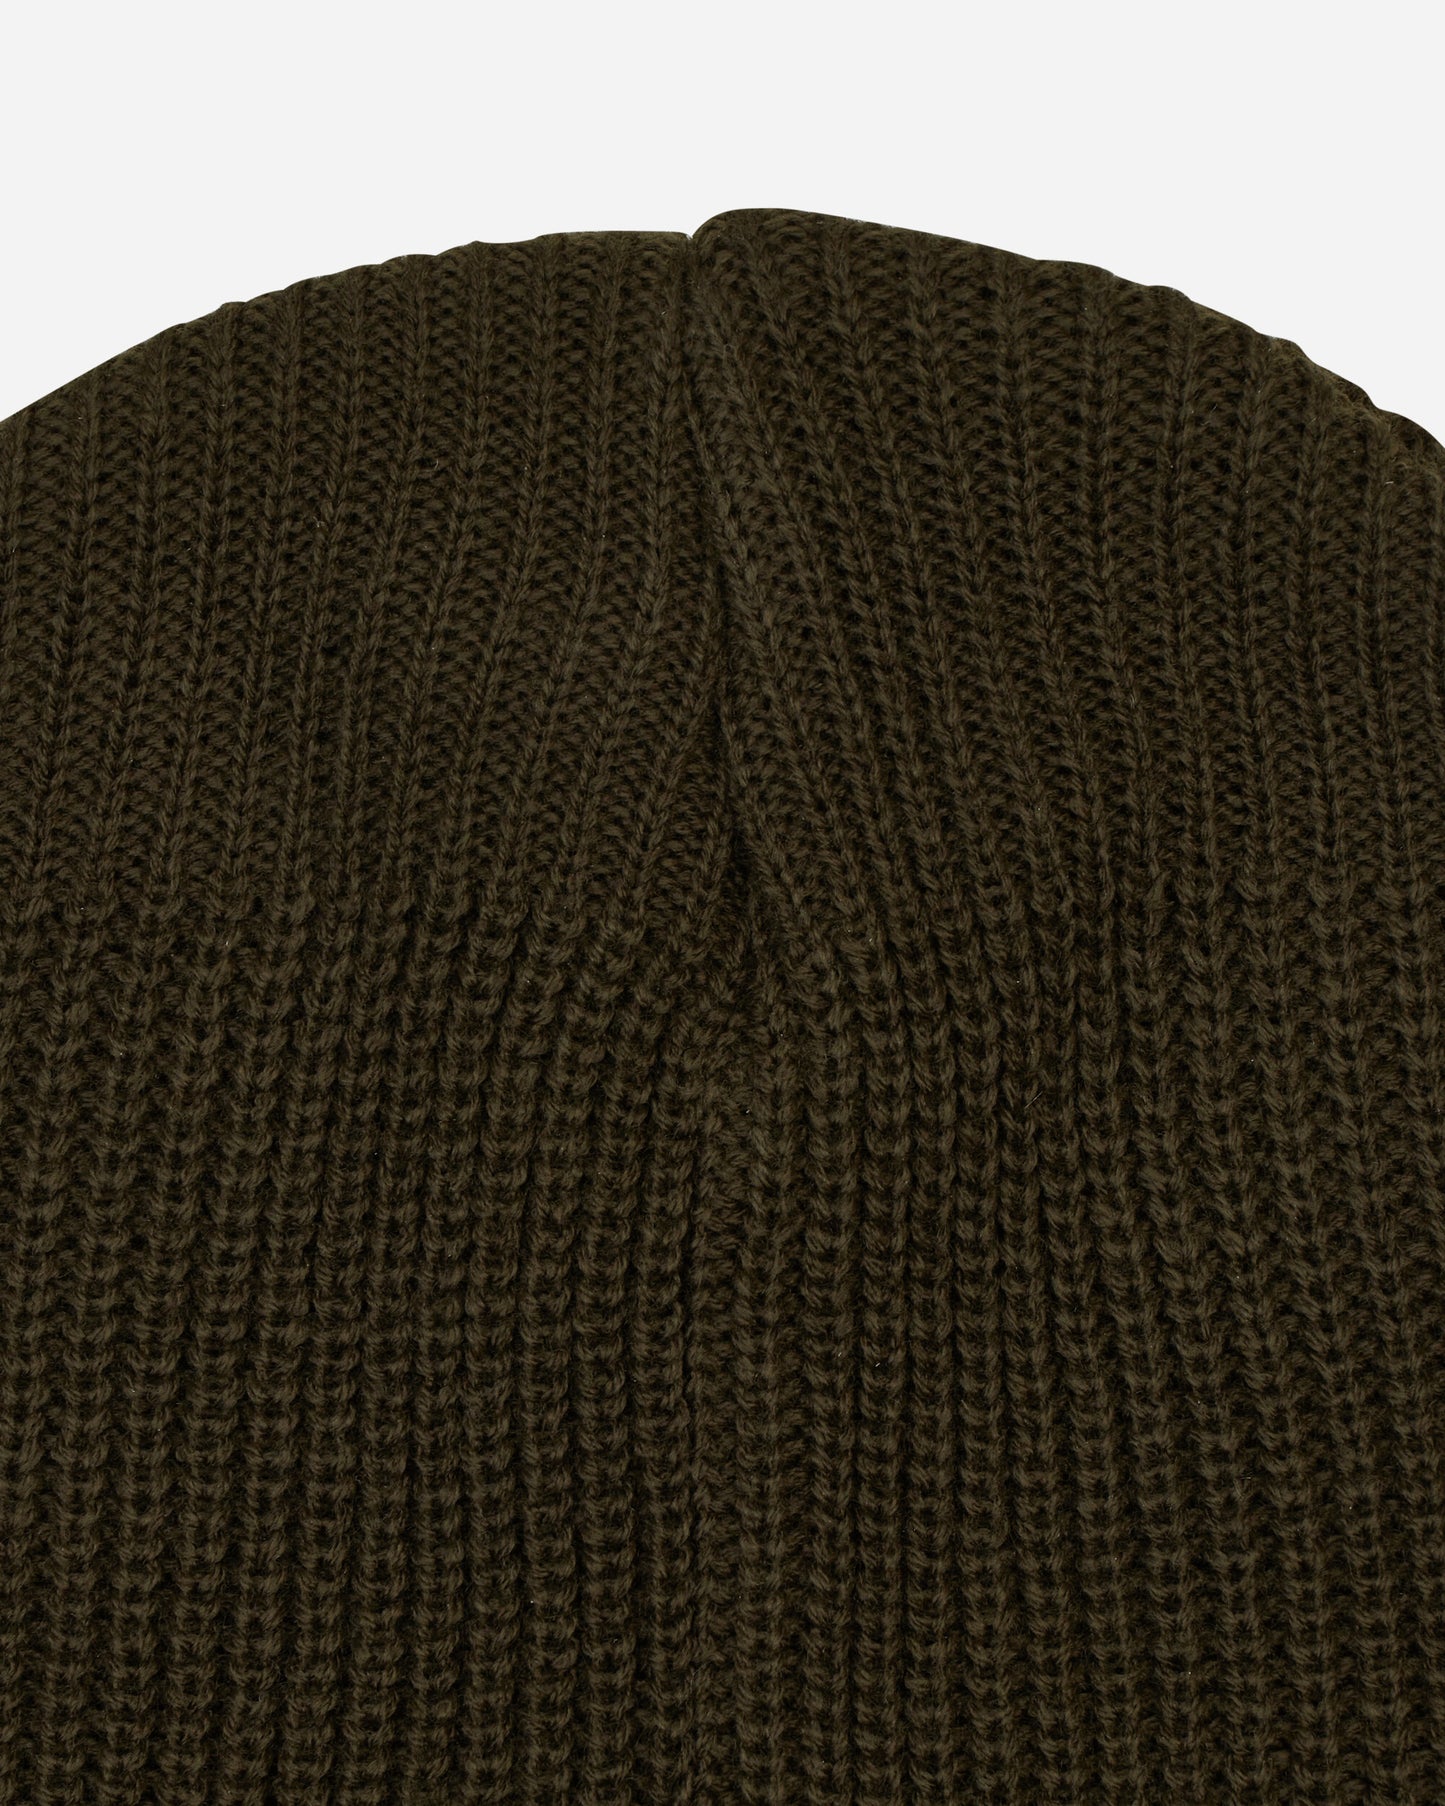 WTAPS Hat 24 Olive Drab Hats Beanies 232MADT-HT03 OD